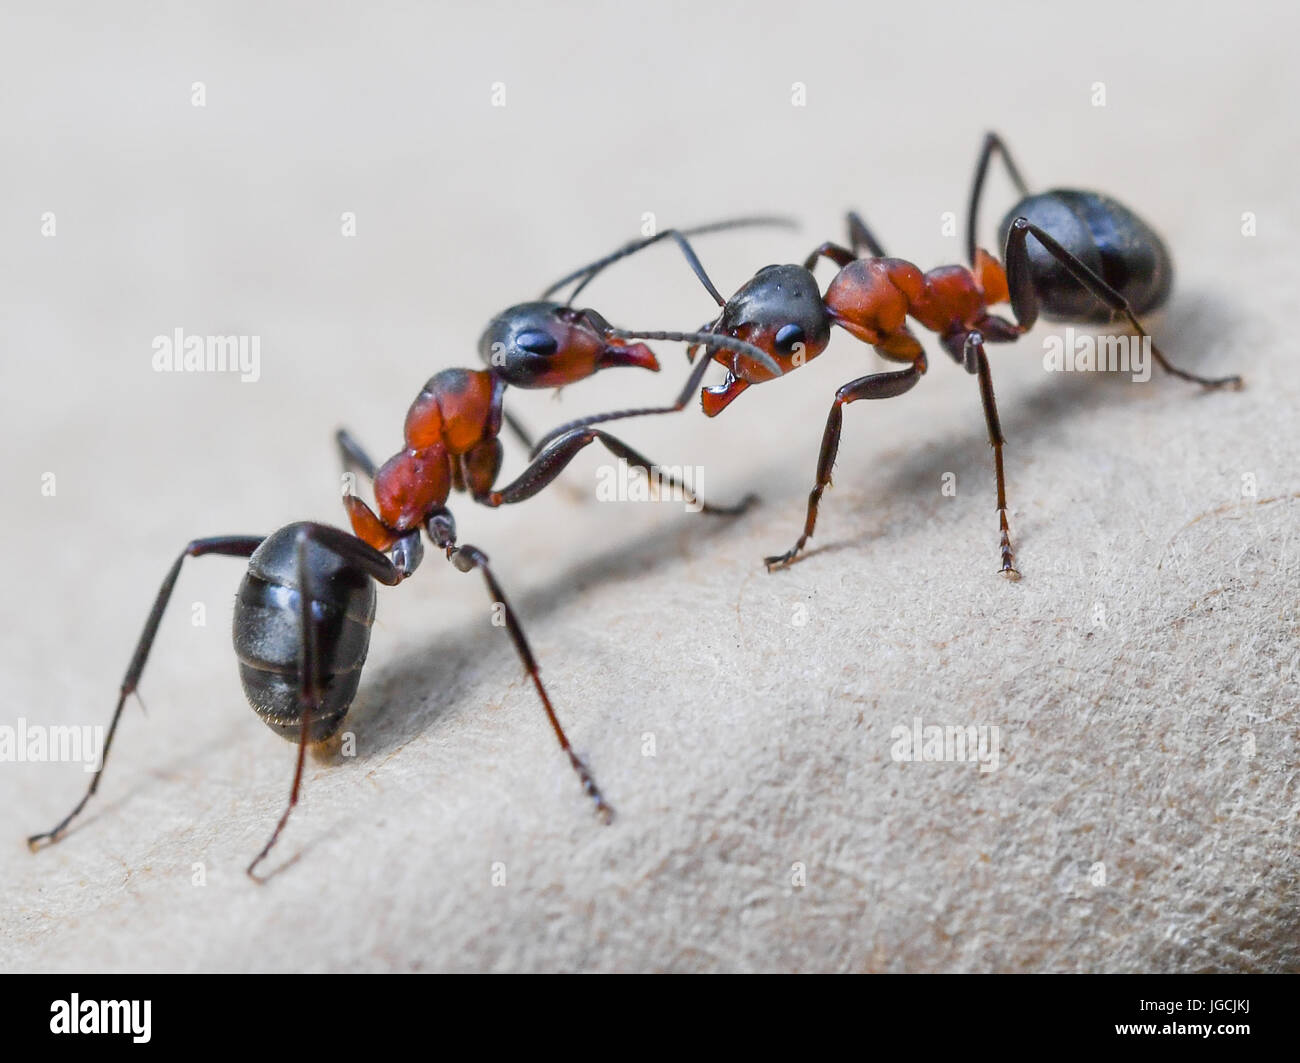 Birkenwerder, Germany. 04th July, 2017. Two Formica polyctenas (species of European red wood ant), photographed in a forest near Birkenwerder, Germany, 04 July 2017. The certified biologist and CEO of the company Nagola Re GmbH, Christina Graetz, helps relocating ants. Photo: Patrick Pleul/dpa-Zentralbild/dpa/Alamy Live News Stock Photo